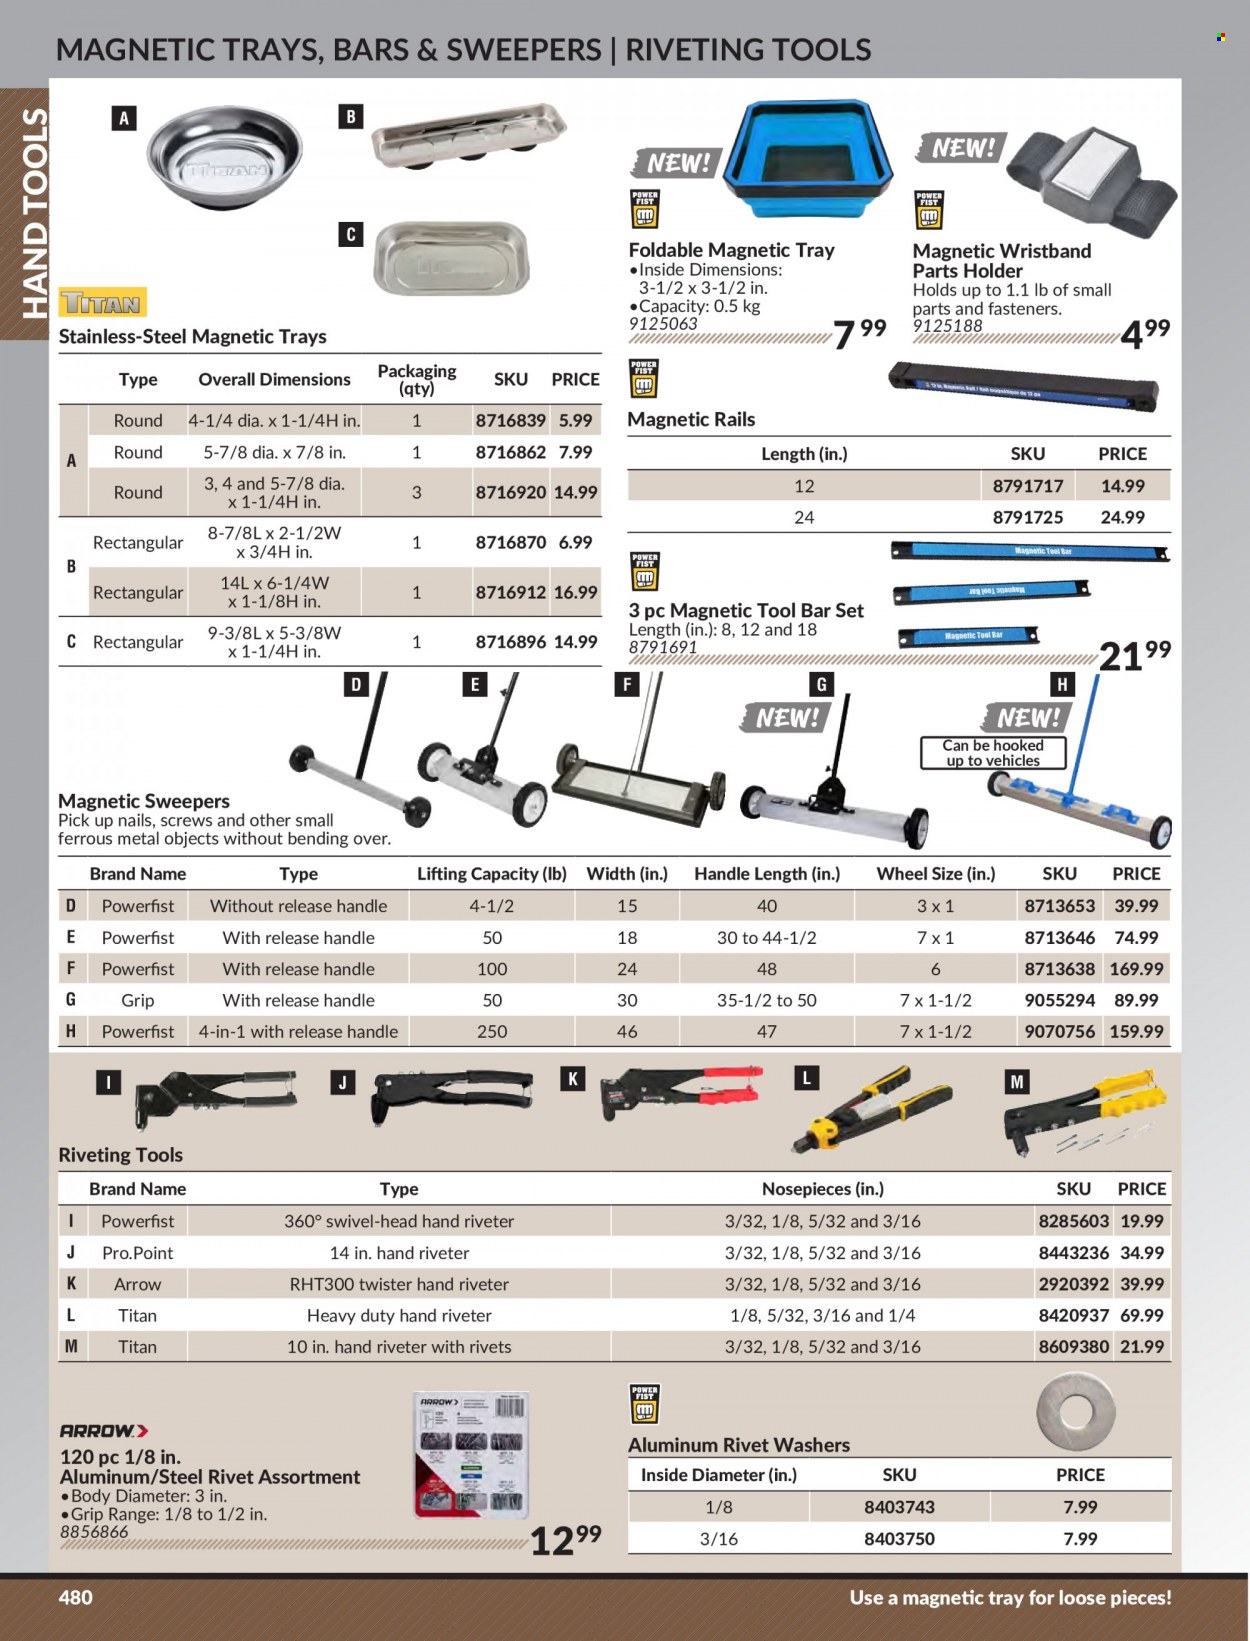 thumbnail - Princess Auto Flyer - Sales products - tray, holder, hand tools, washers, parts holder. Page 490.